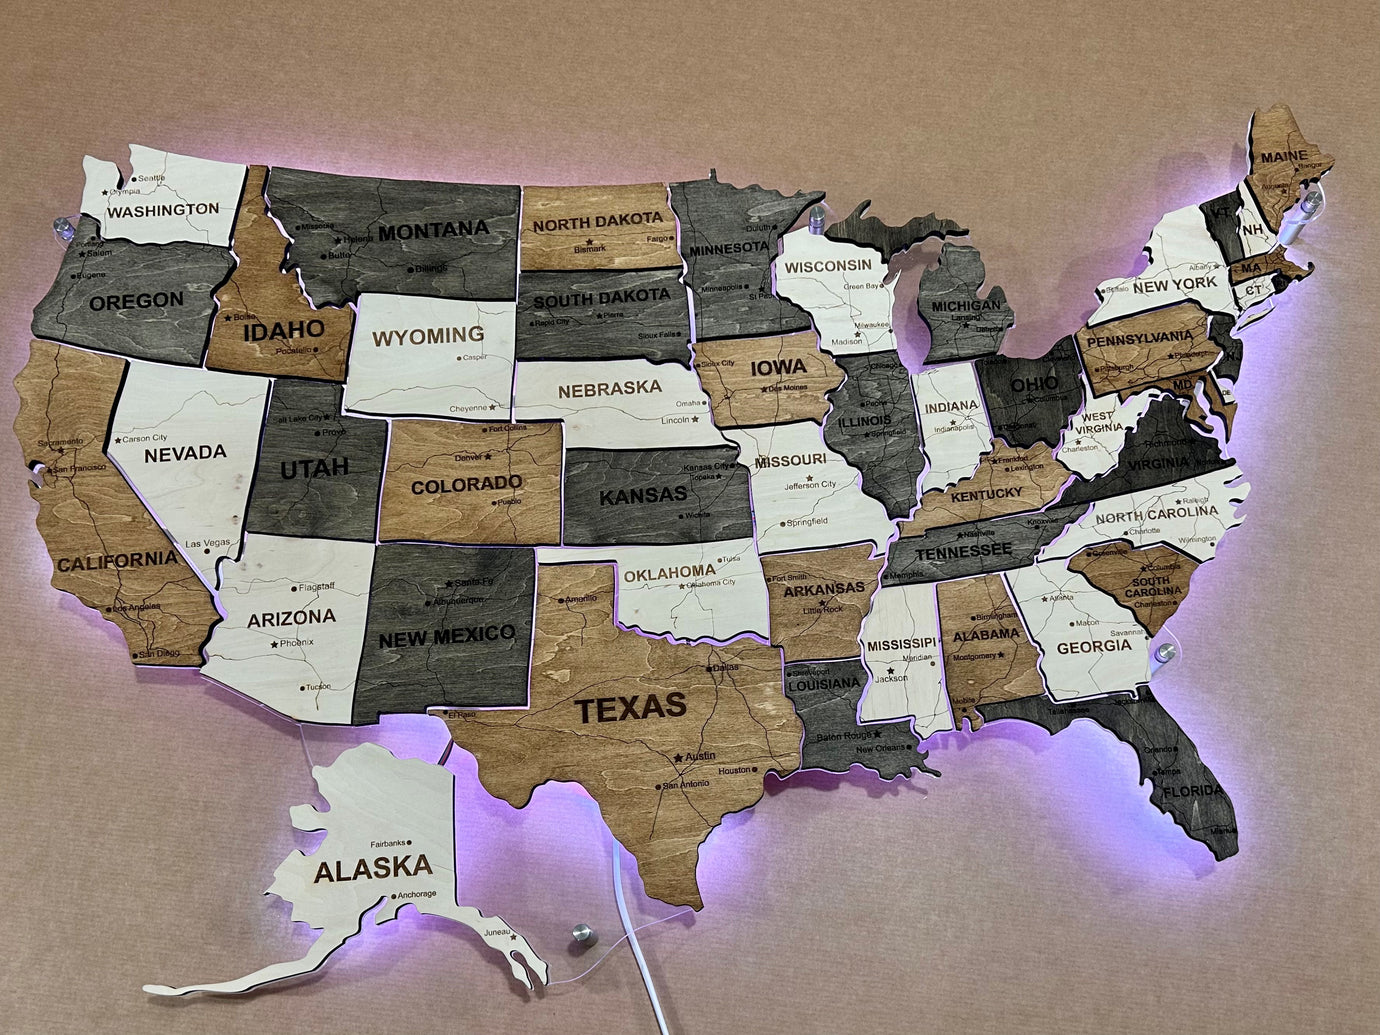 The USA LED RGB map on acrylic glass with roads and backlighting between states color Wander